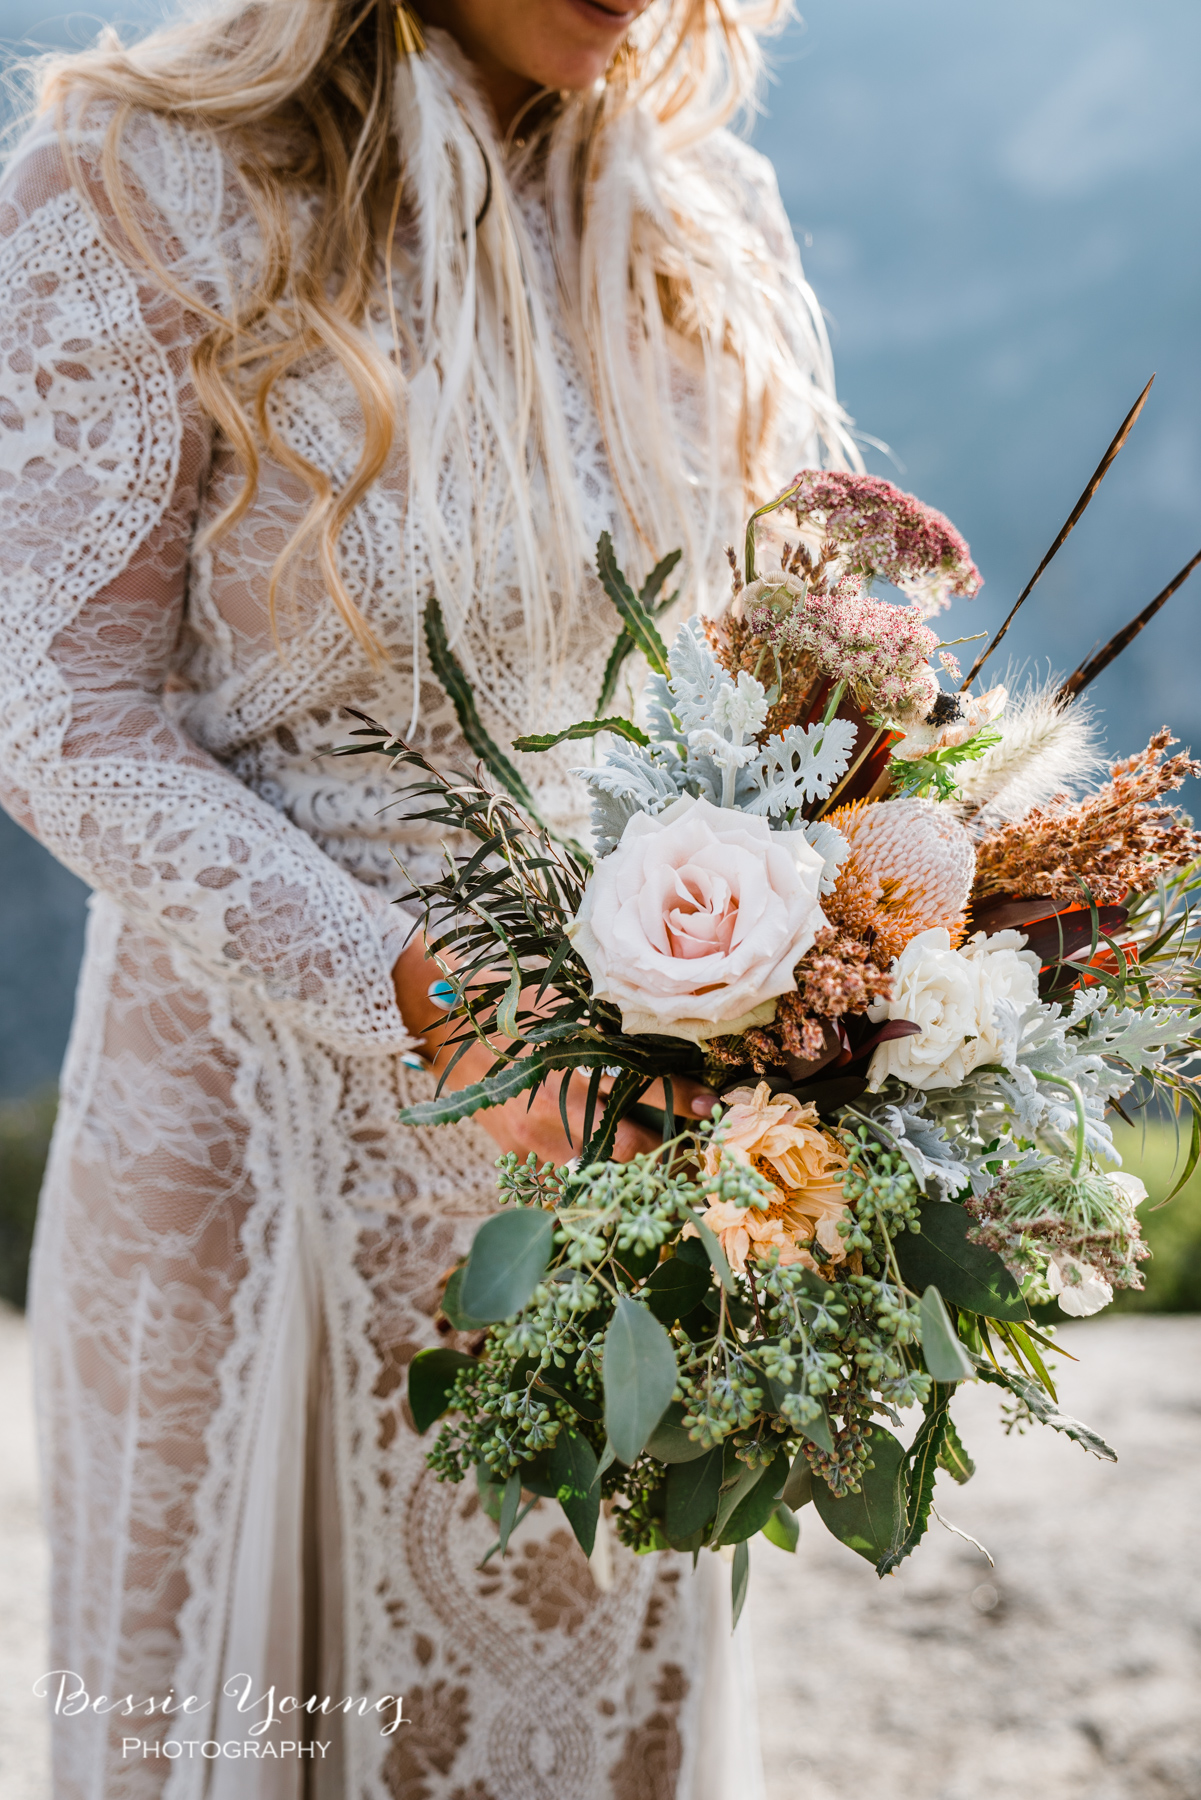 Wedding bouquet ideas  - by Bessie Young Photography-11.jpg